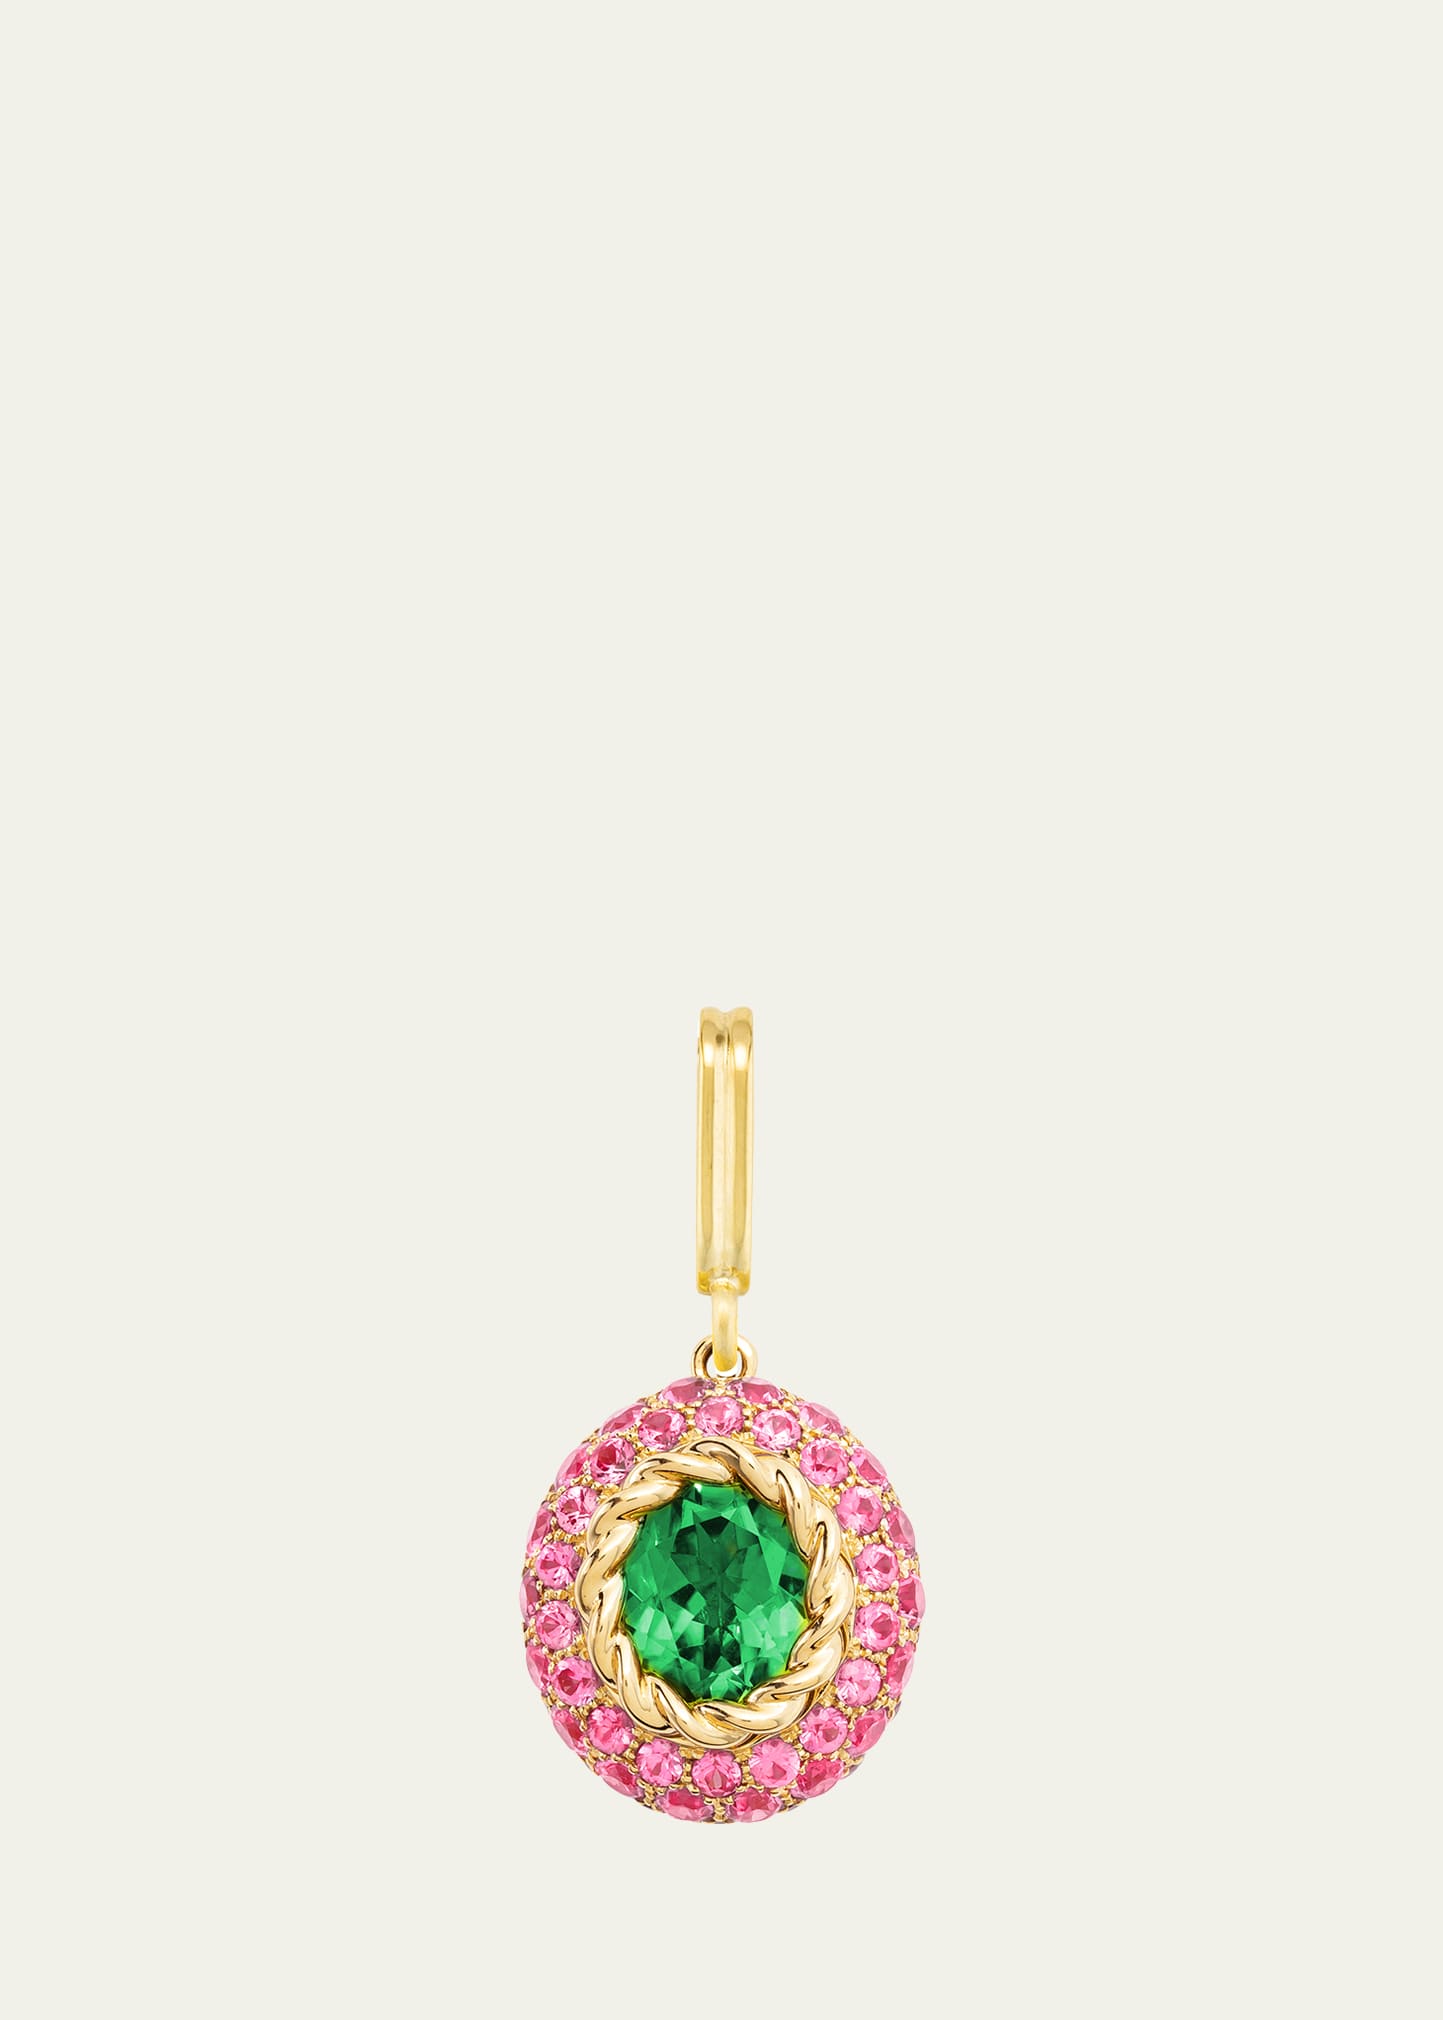 Mellerio 18k Yellow Gold Baby Fields Medal Charm With Peridot And Pink Sapphires In Multi